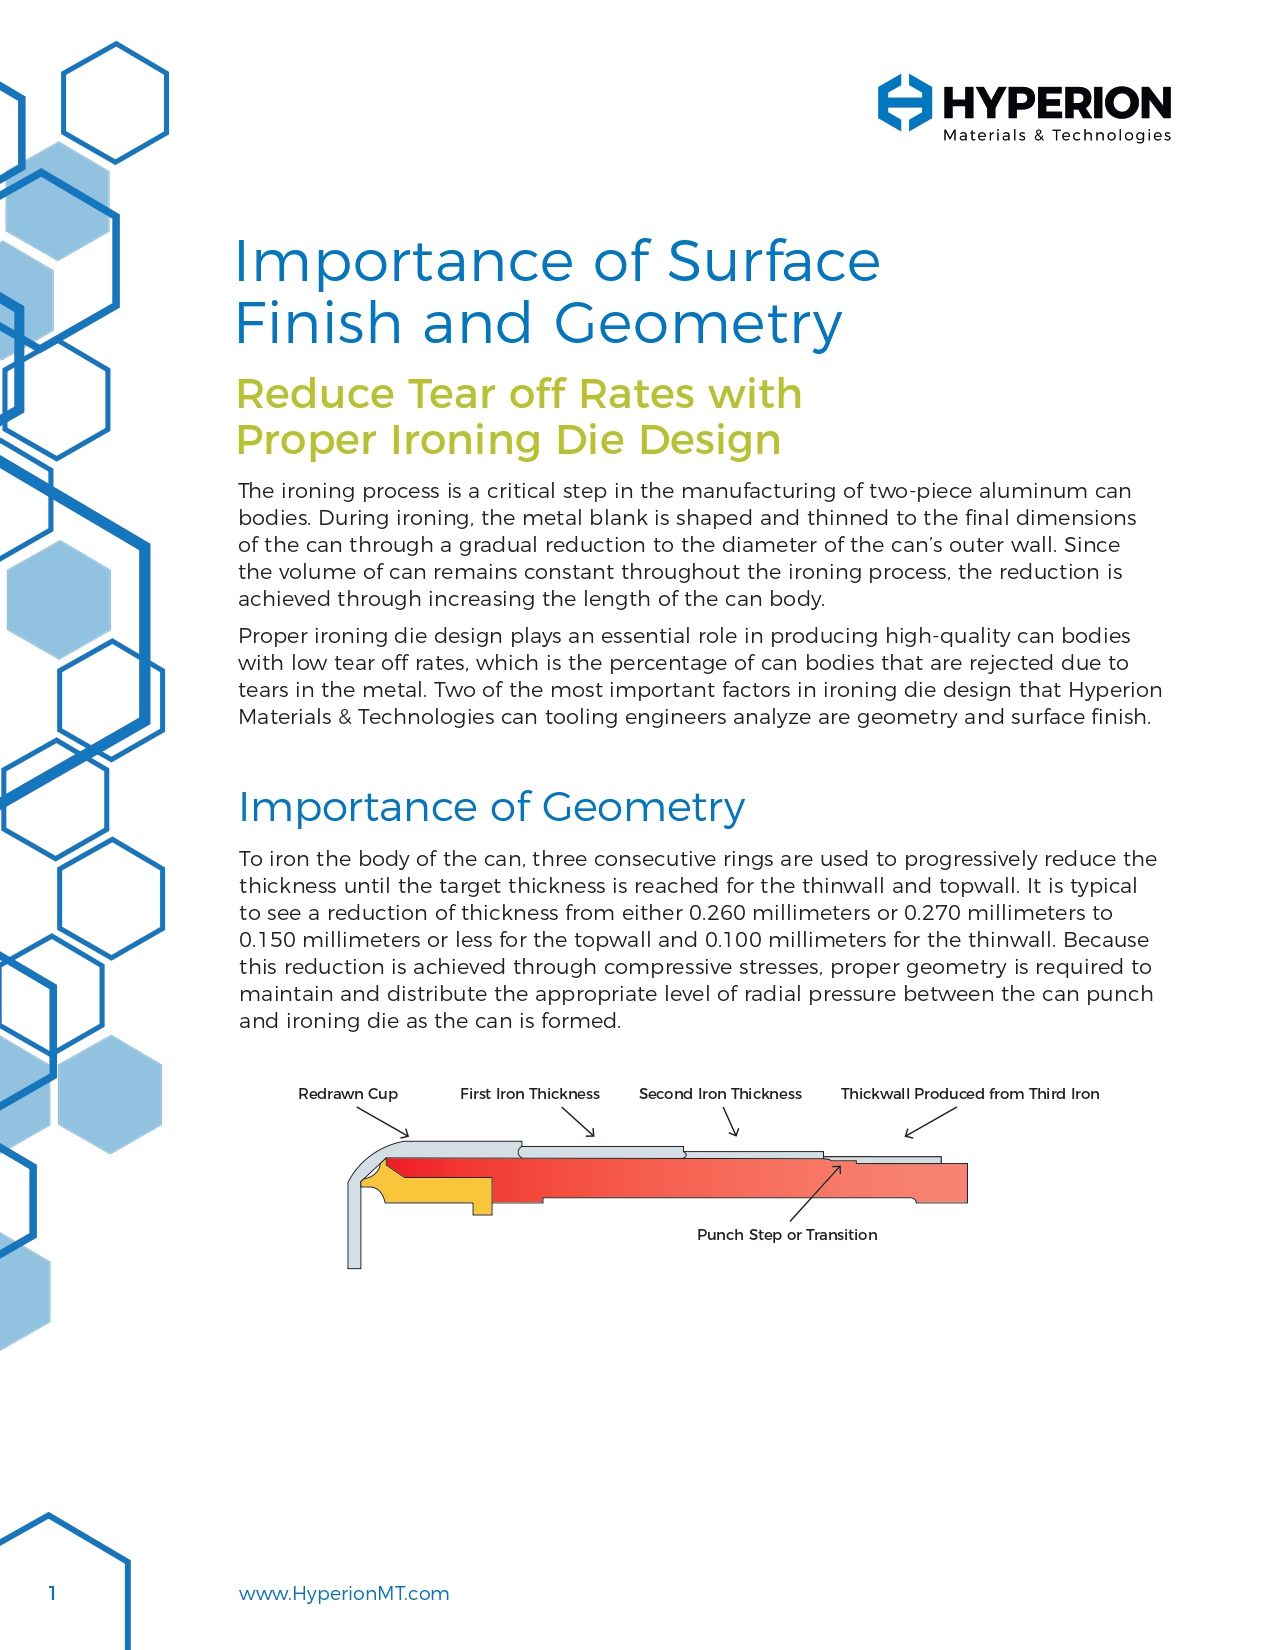 Importance of Surface Finish and Geometry: Reduce Tear off Rates with Proper Ironing Die Design